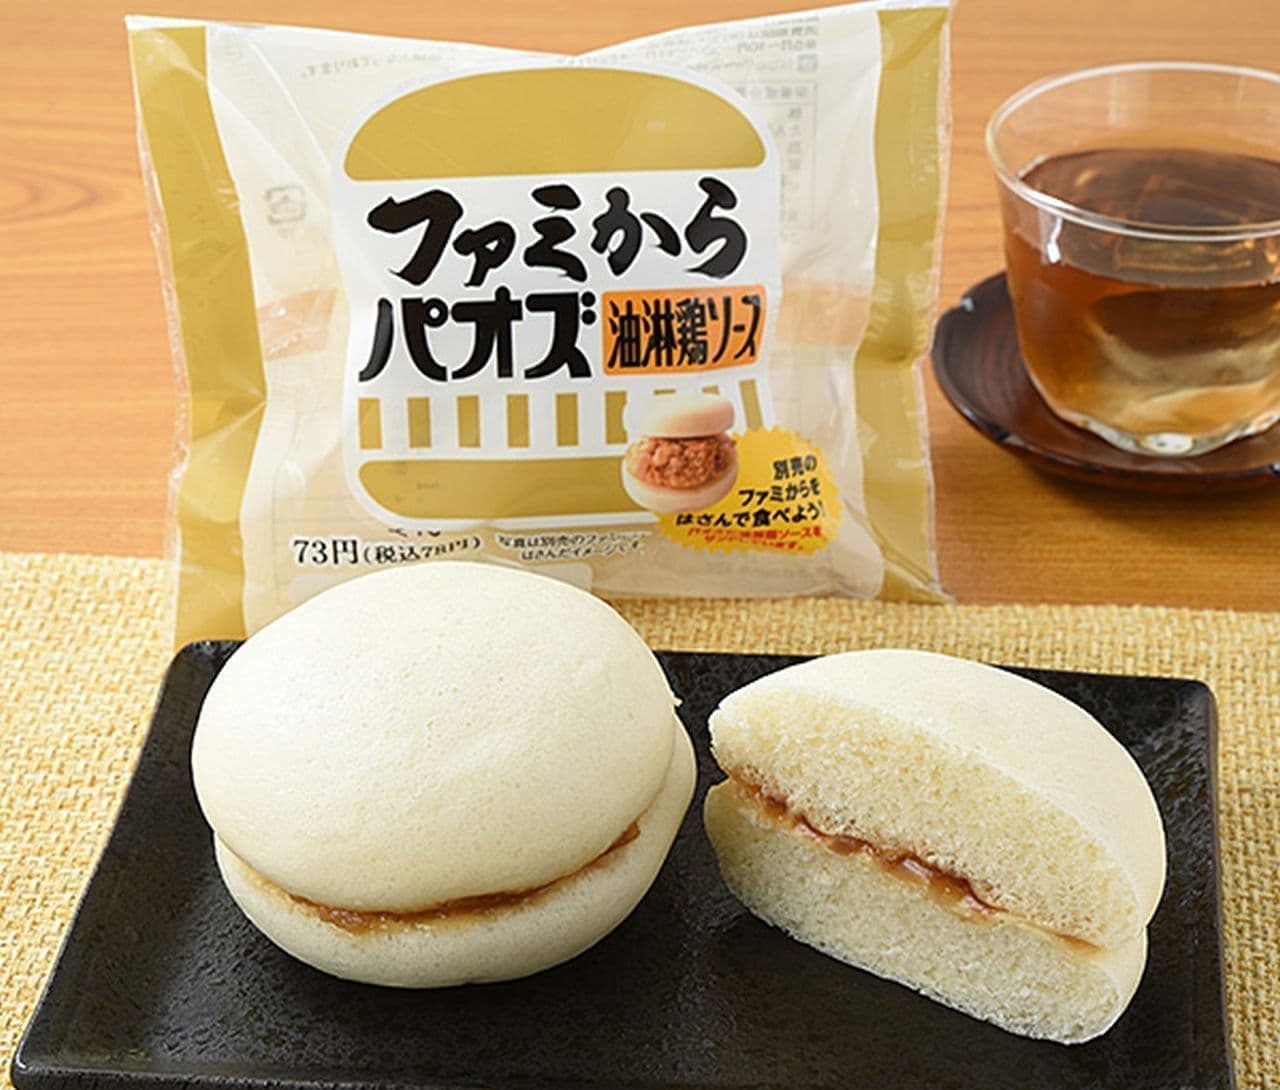 Famima "Famikara Paozu (Abura Gon Chicken Sauce)", the second in a series of buns that allow you to make your own original burger by inserting your favorite ingredients.